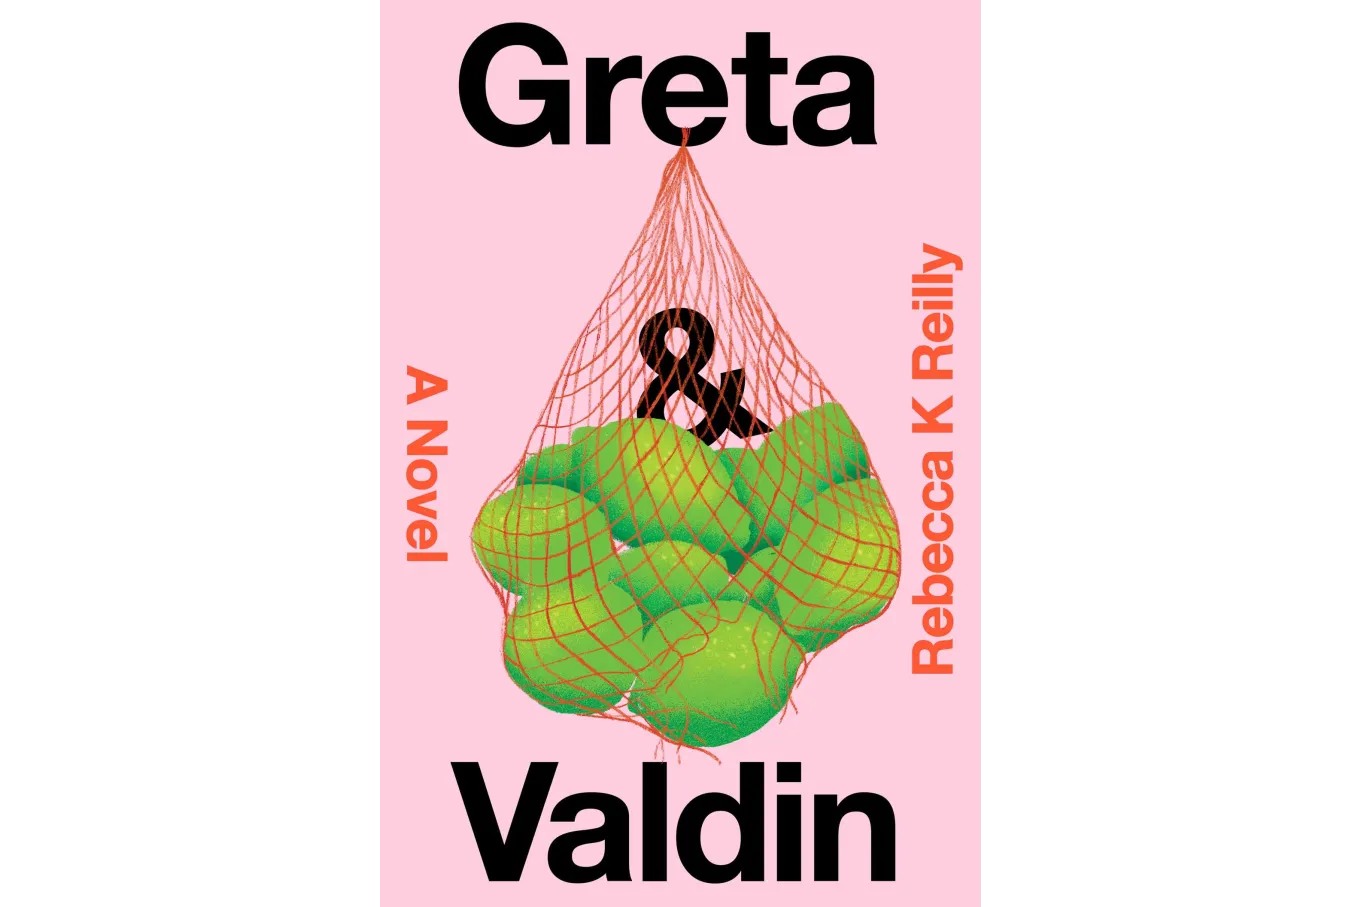 Greta is in bold black font at the top of the cover, from the "e" hangs a mesh basket of bright green limes with the "&" balanced percariously above them. The bottom of the mesh bag is ripped open with one of the limes about to tumble out on to the bold "Valdin" beneath.